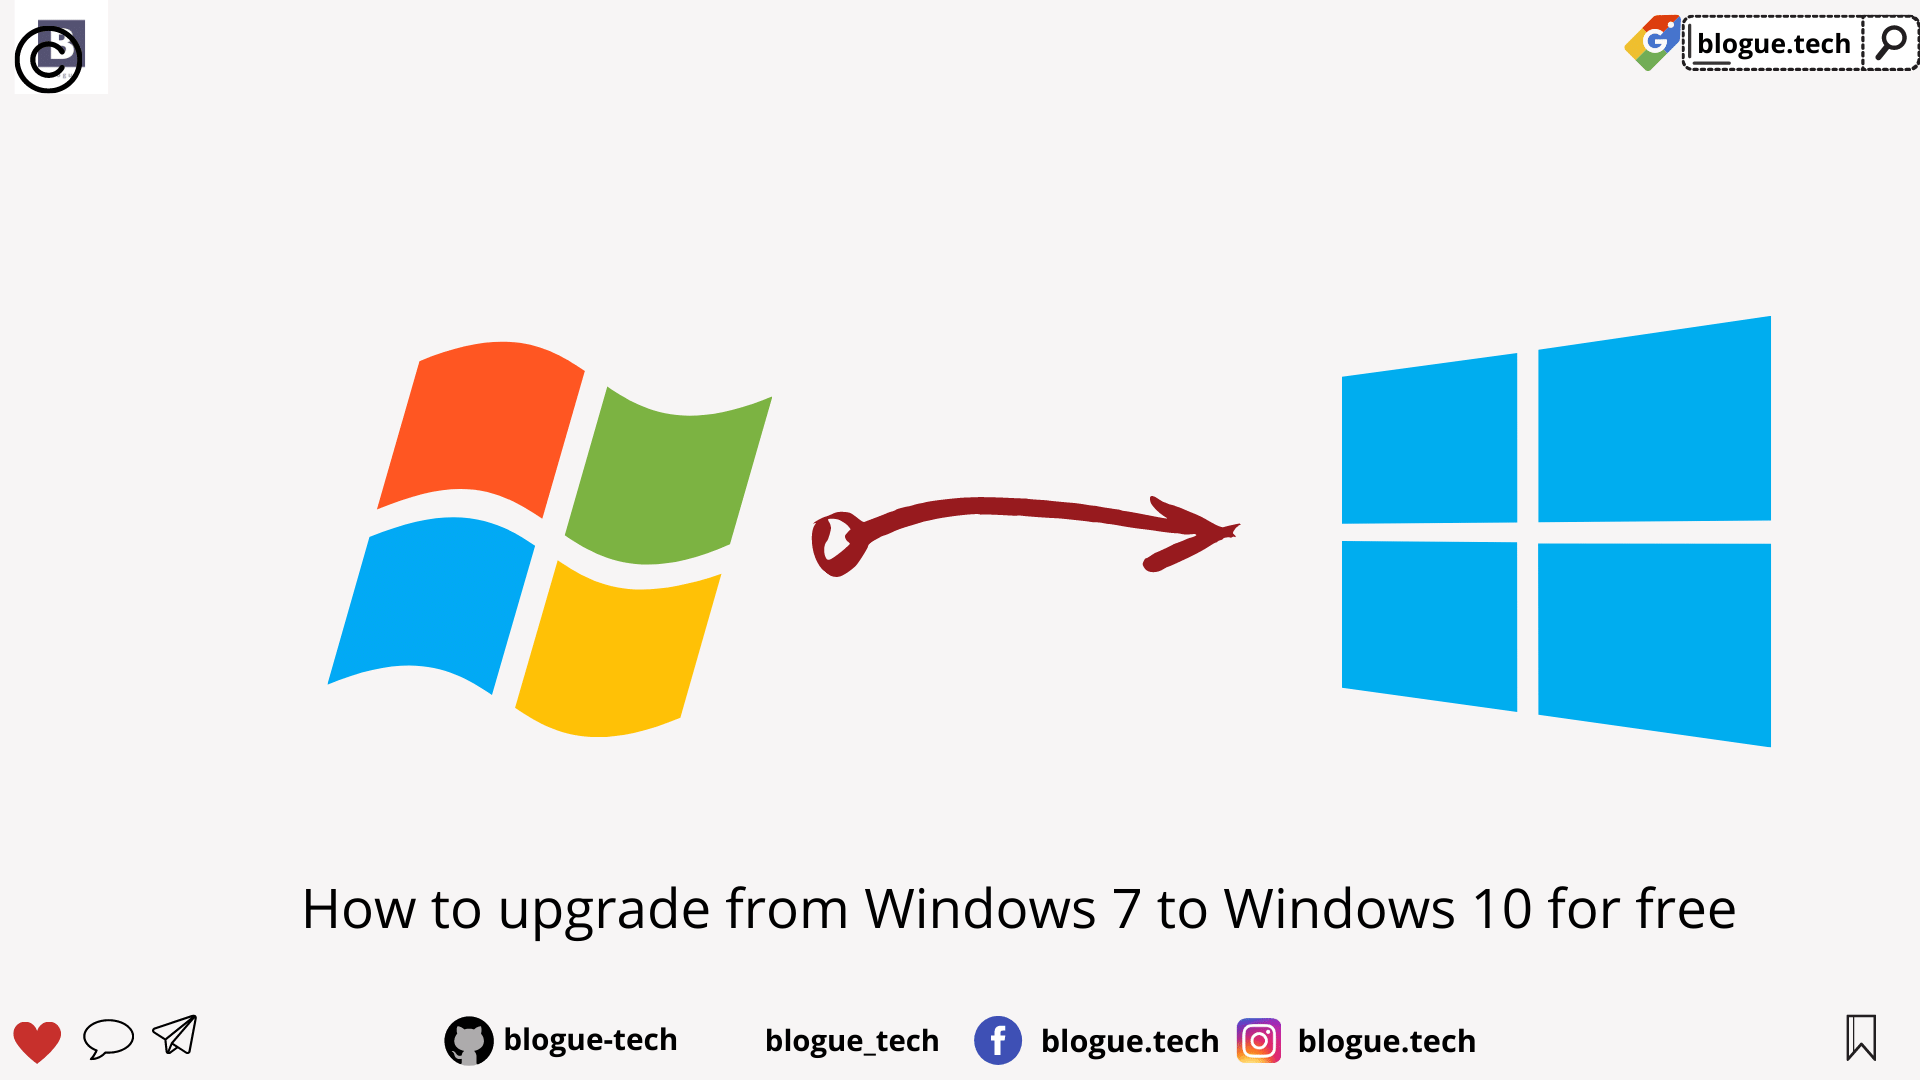 How to upgrade from Windows 7 to Windows 10